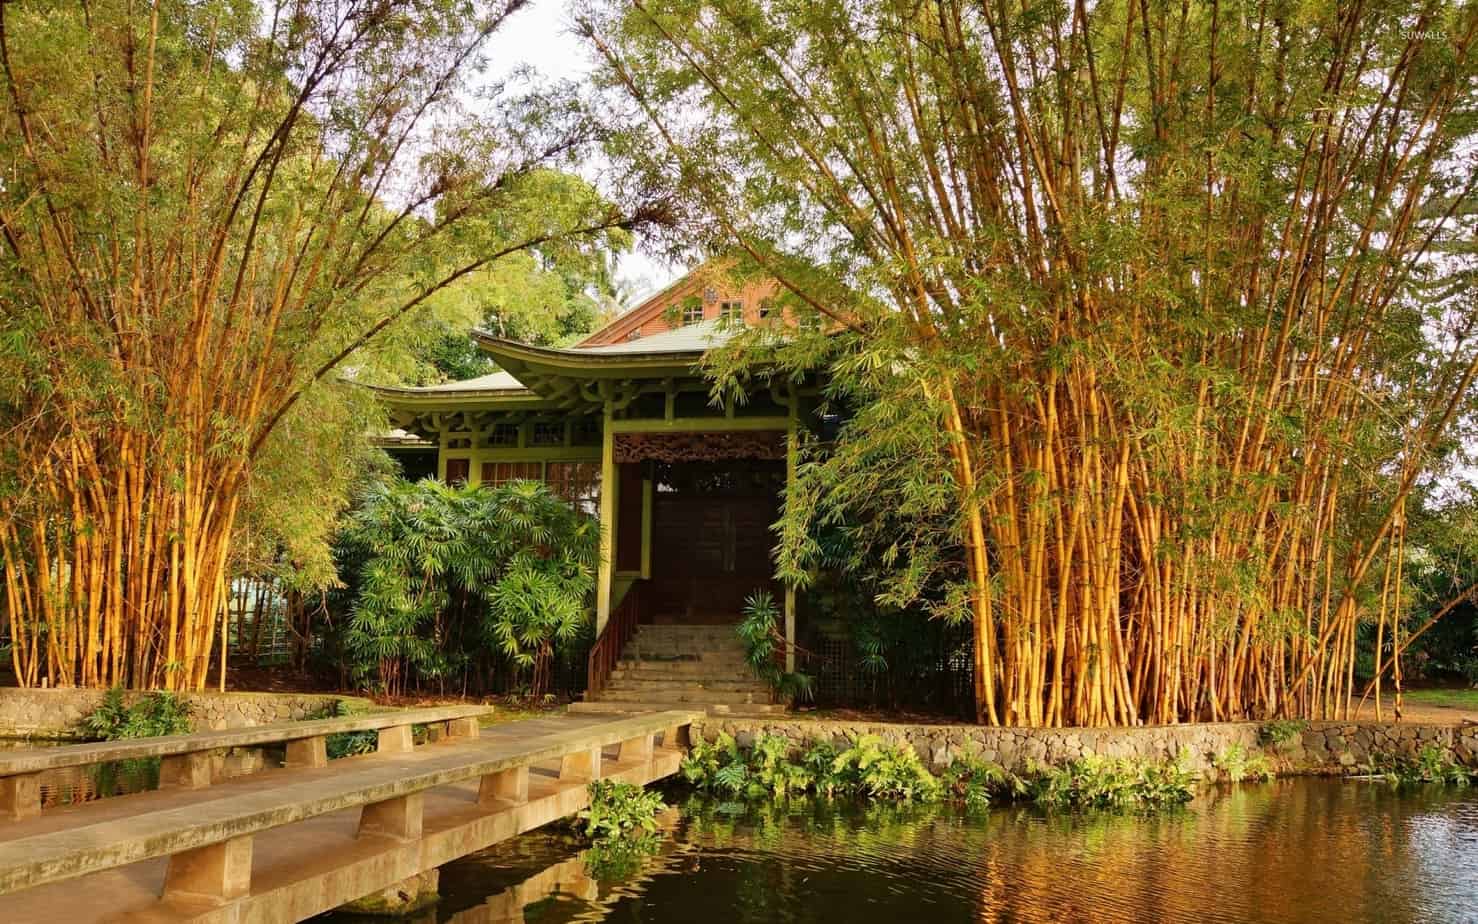 Bamboo trees on a Japanese garden, providing privacy and shade